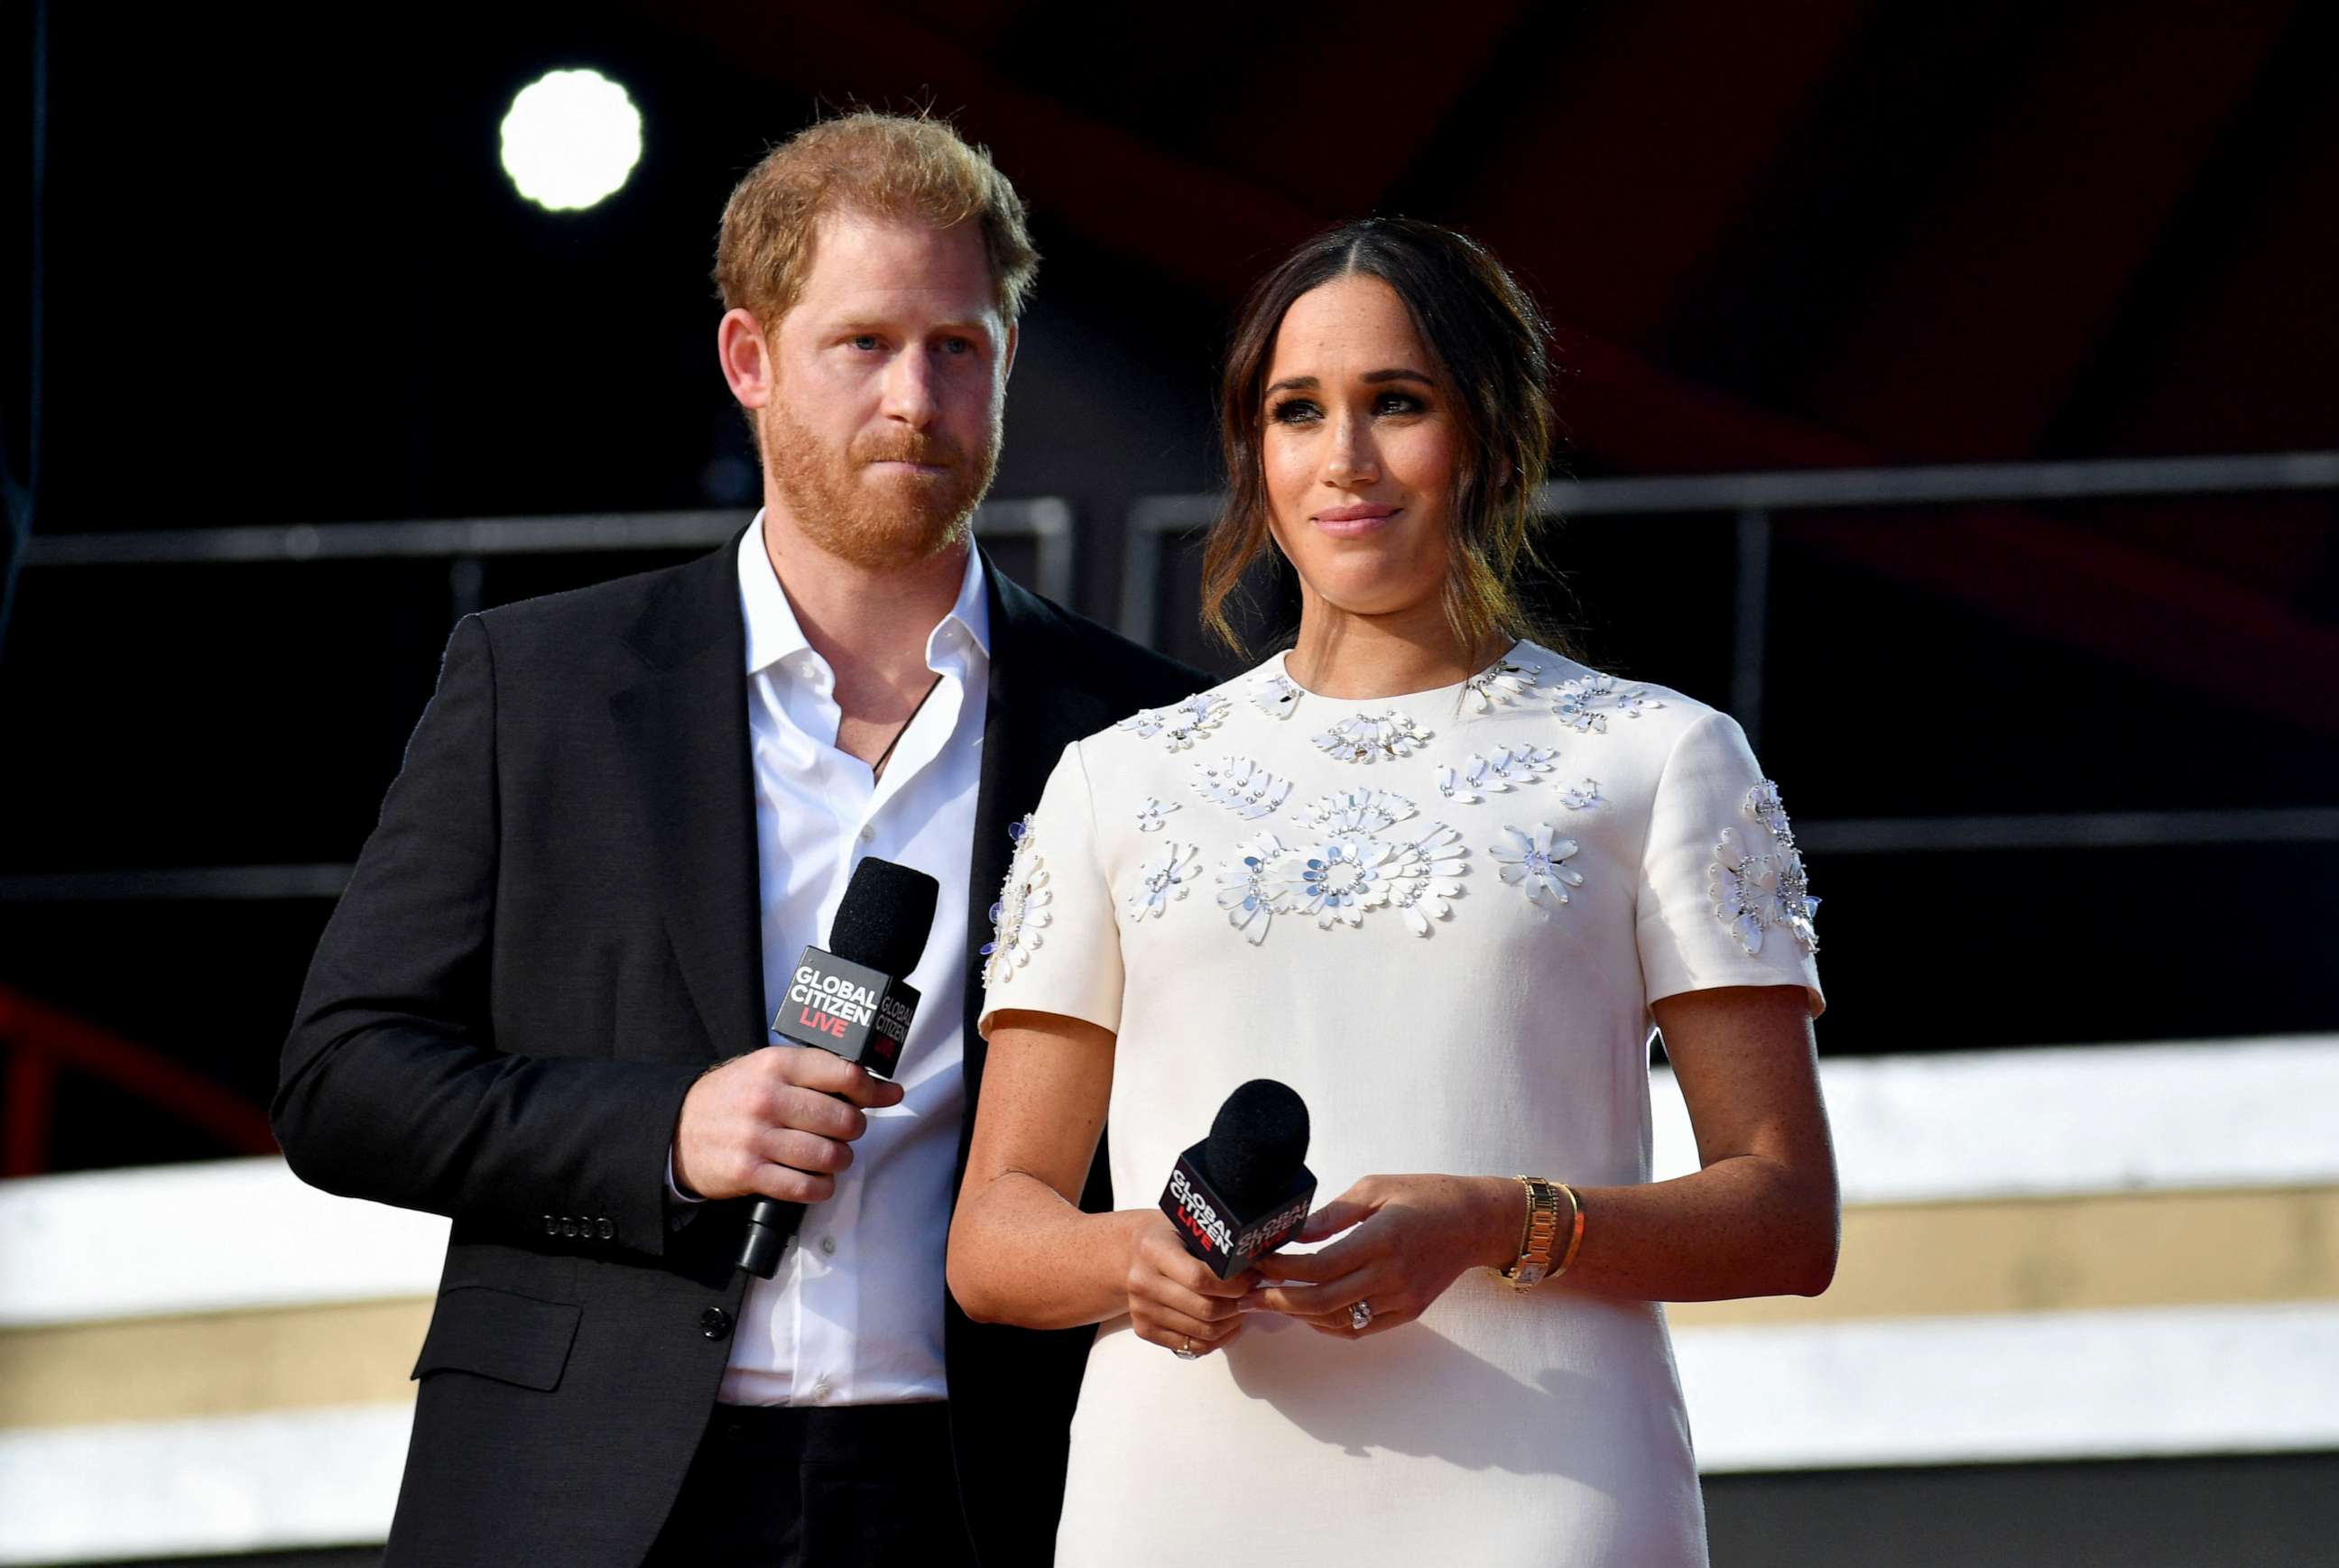 PHOTO: Prince Harry and Meghan Markle speak during the 2021 Global Citizen Live festival at the Great Lawn, Central Park on September 25, 2021 in New York City.